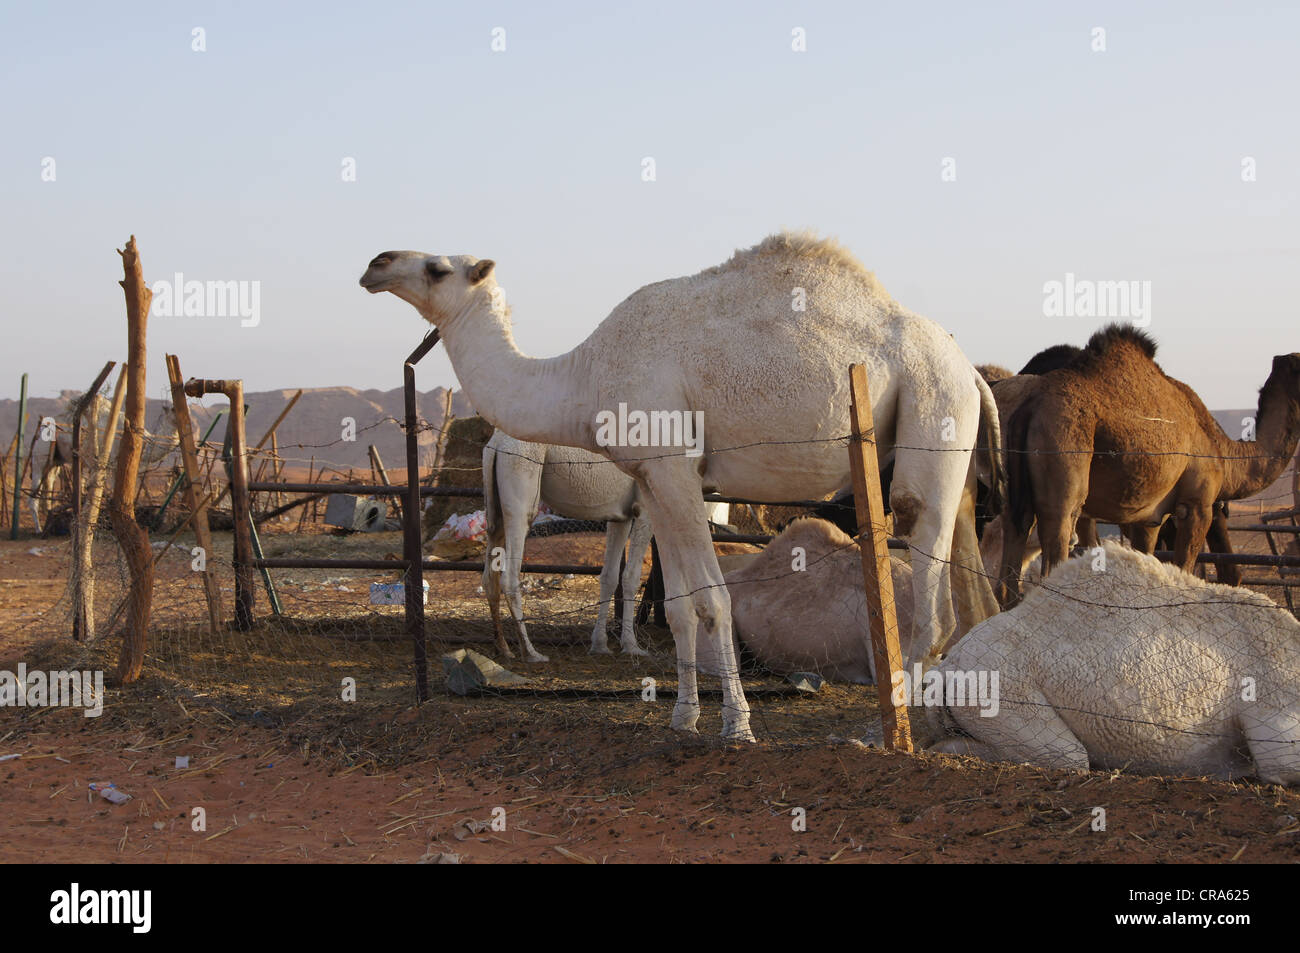 Some camels in their pen in the late afternoon sunshine at the Red Sands, Riyadh, Kingdom of Saudi Arabia Stock Photo